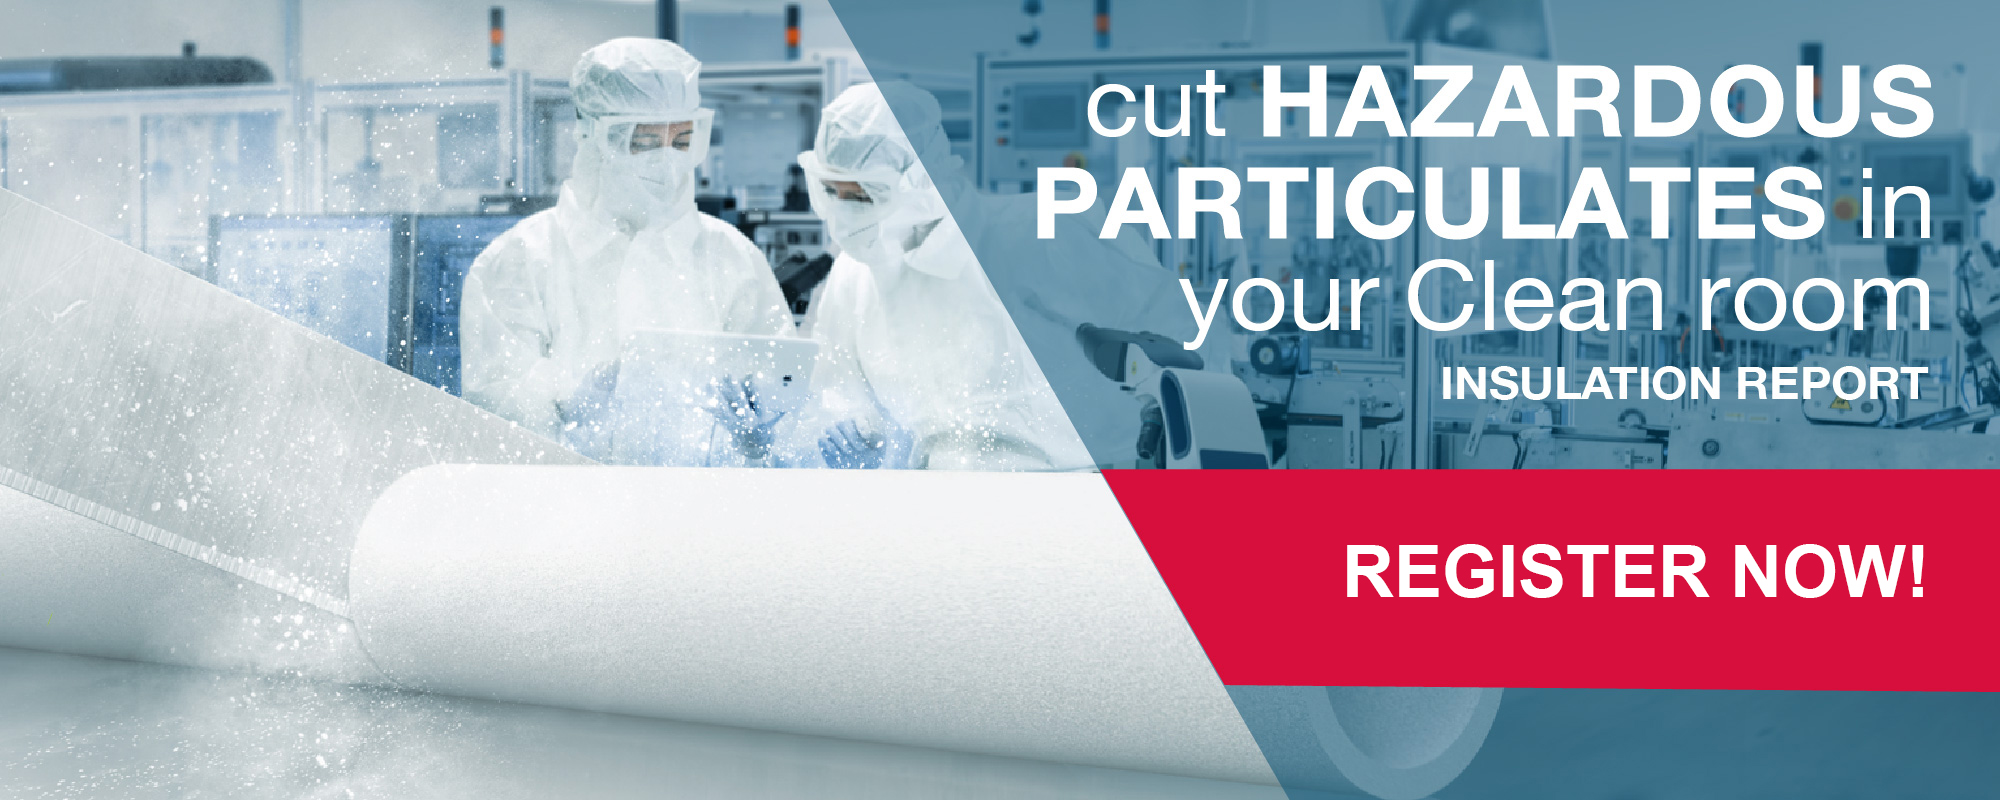 FREE DOWNLOAD: Cut hazardous particulates in your cleanroom